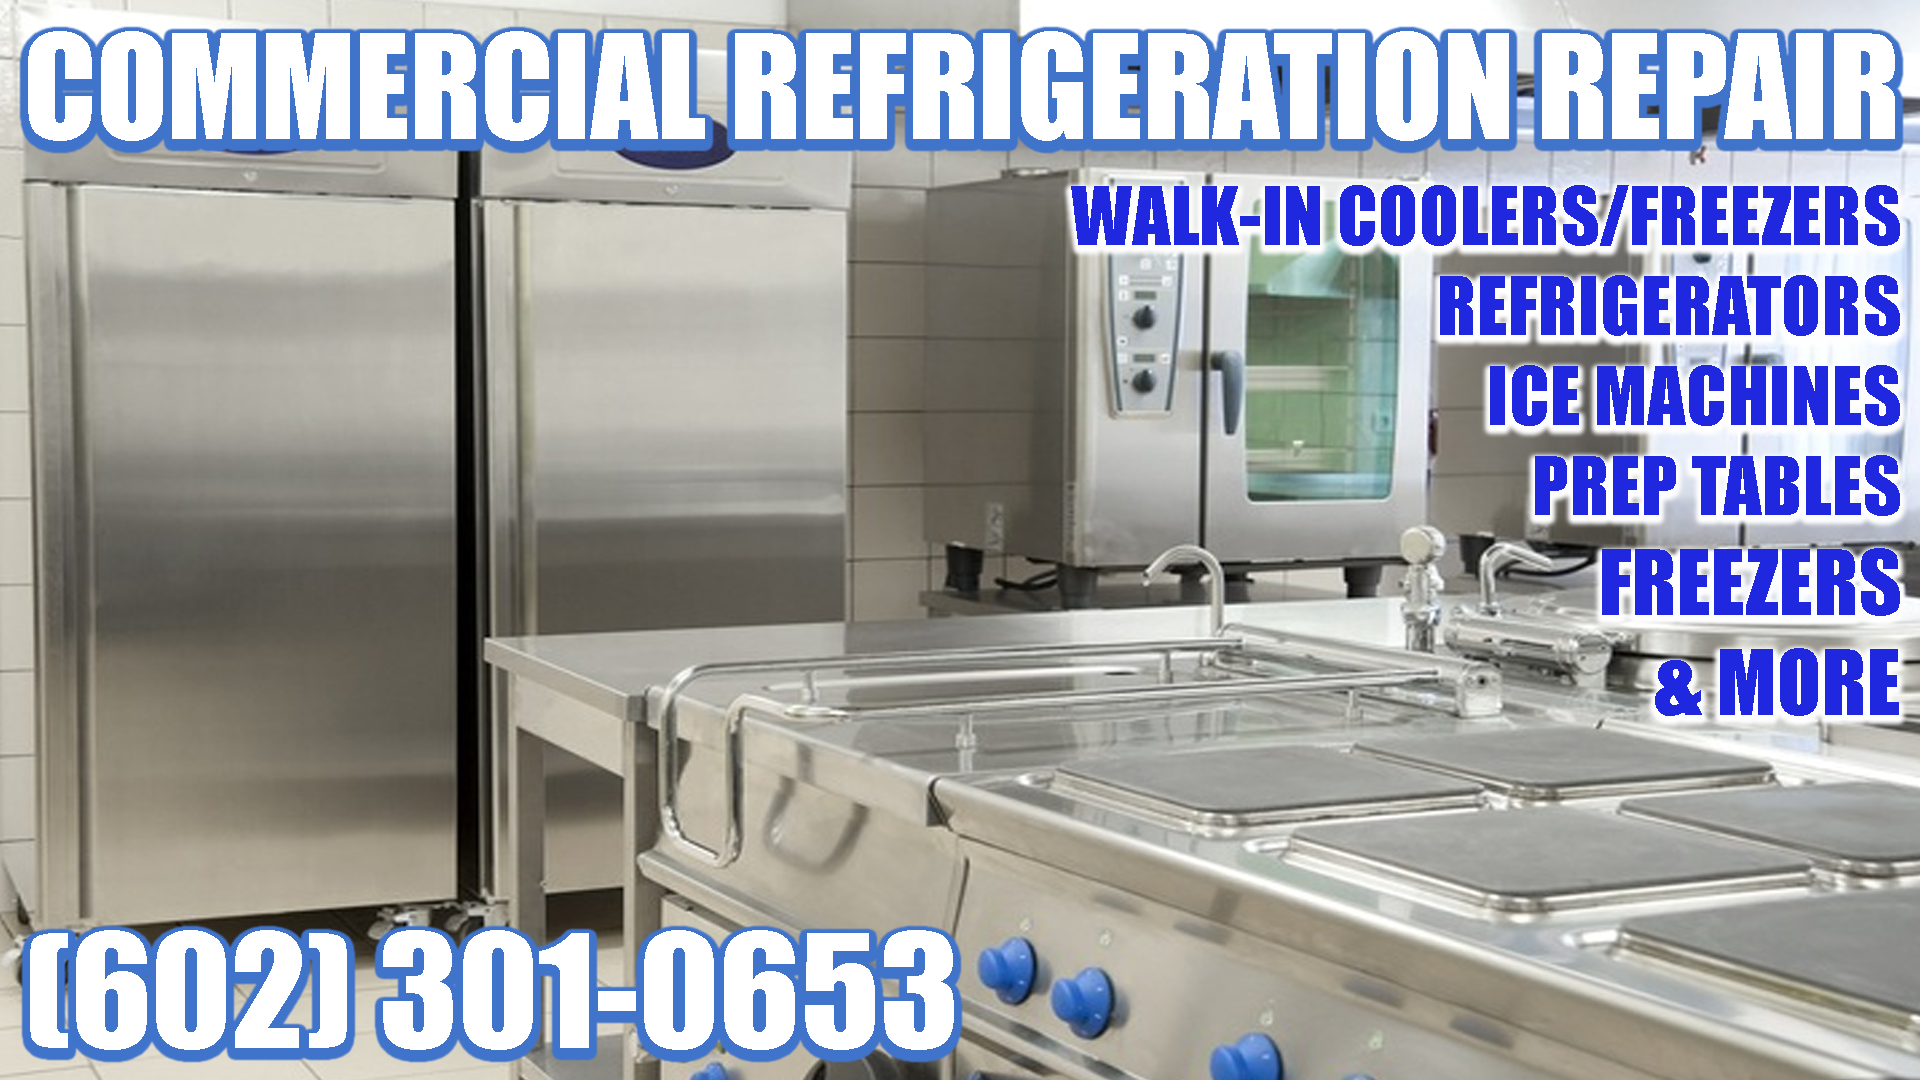 Restaurant Equipment Repair Including Commercial Ice Machine Repair and Commercial Refrigeration